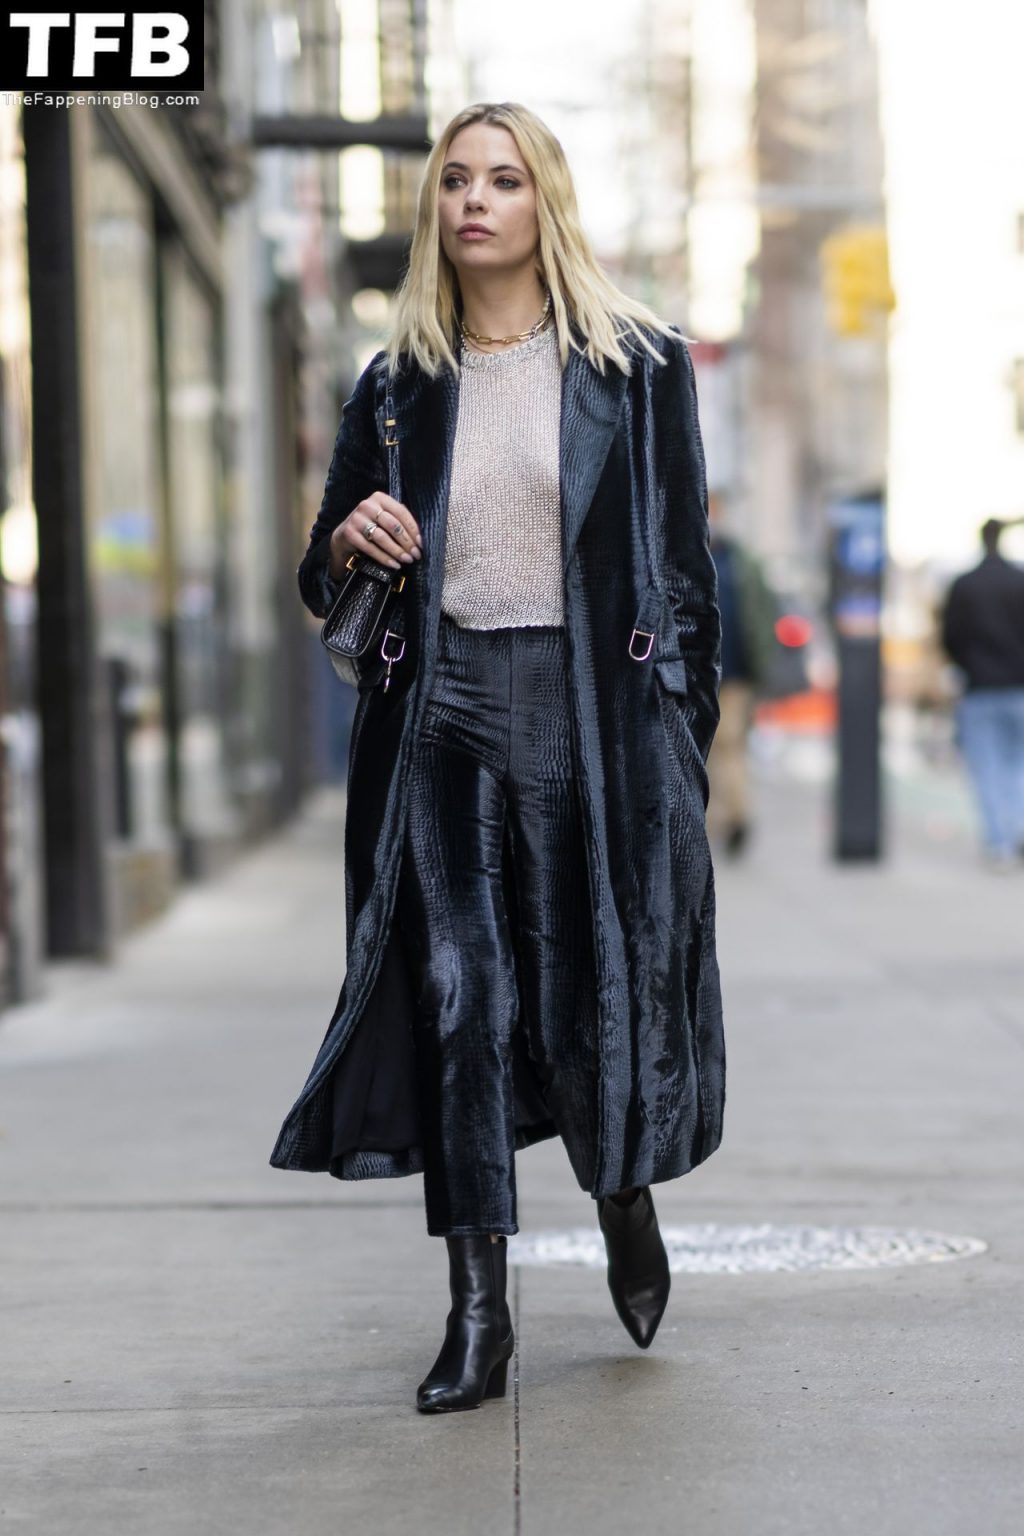 Ashley Benson Sexy The Fappening Blog 7 1024x1536 - Braless Ashley Benson Looks Stylish While Heading to a Meeting in NYC (20 Photos)